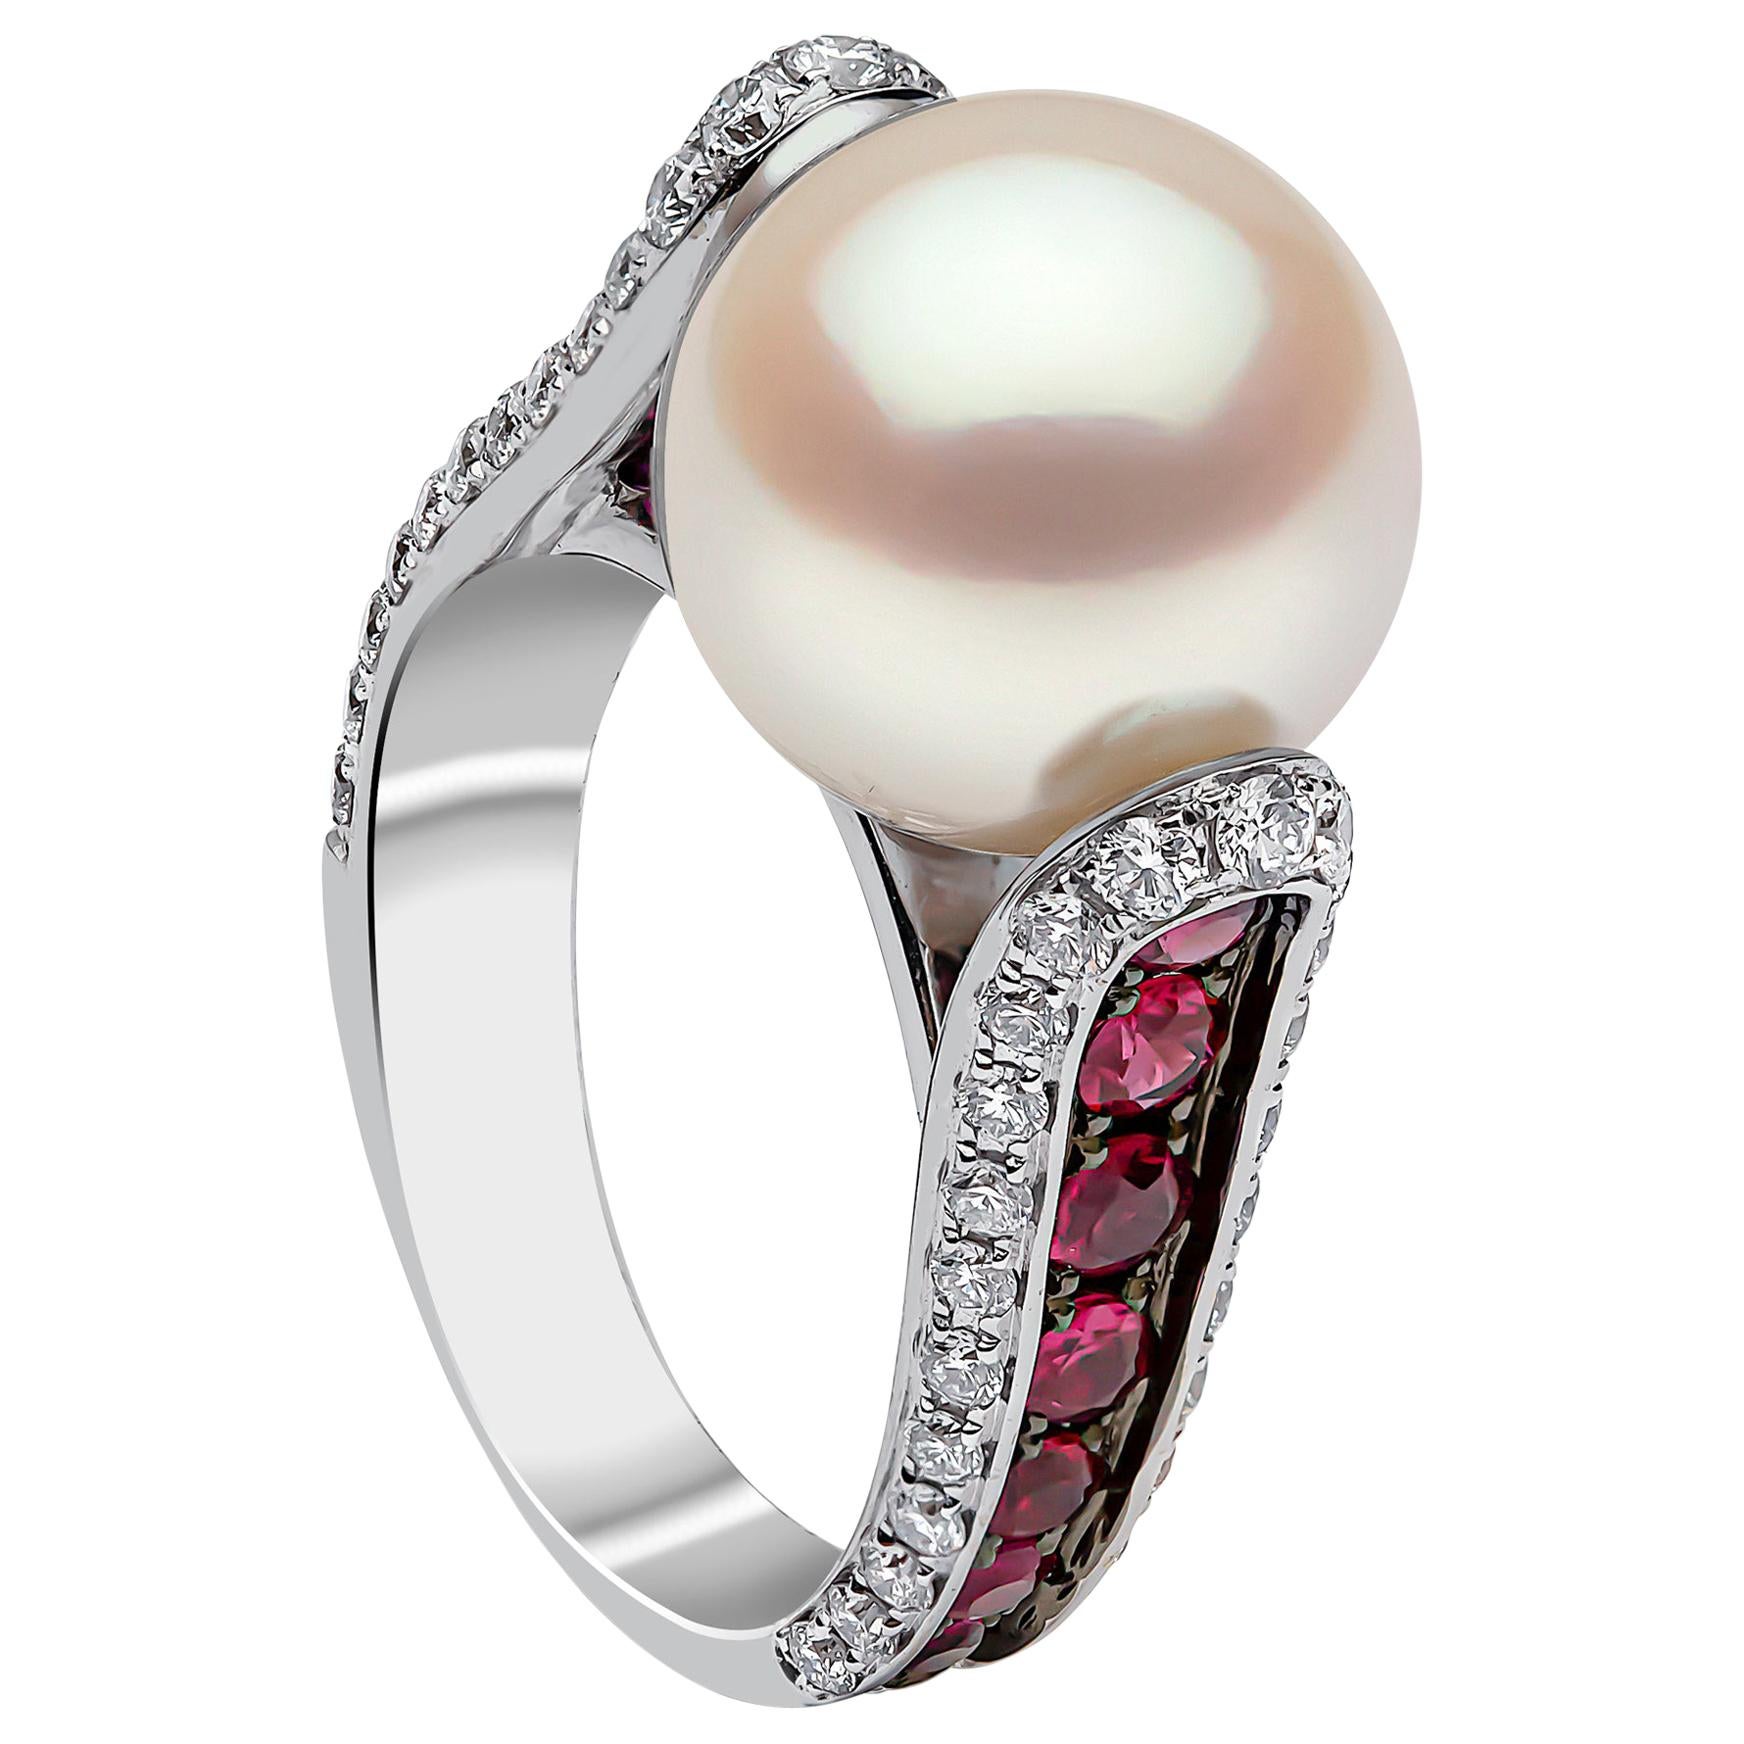 Yoko London South Sea Pearl, Ruby and Diamond Ring in 18 Karat White Gold For Sale